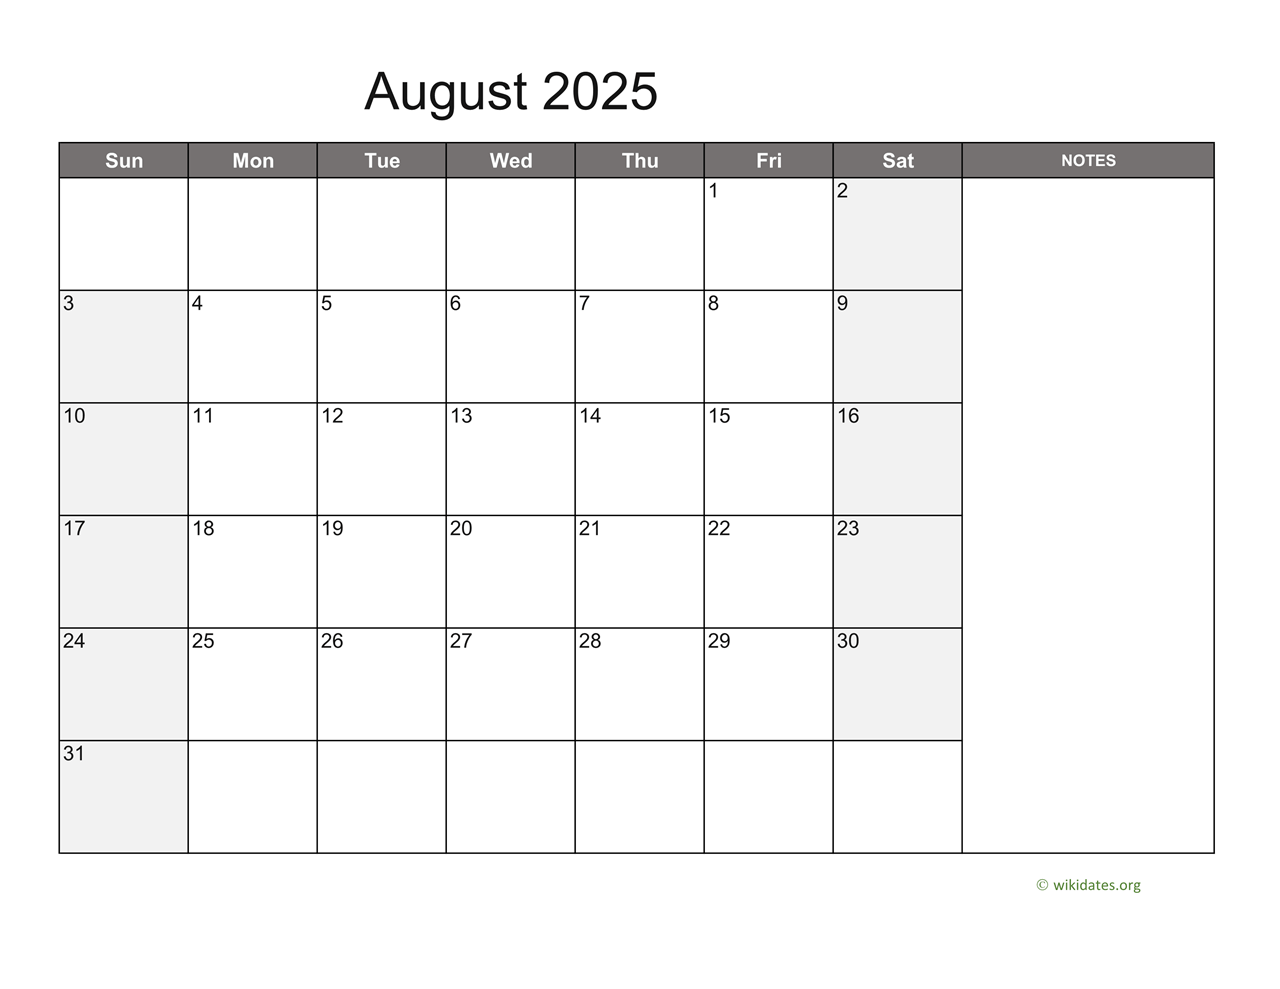 august-2025-calendar-with-notes-wikidates